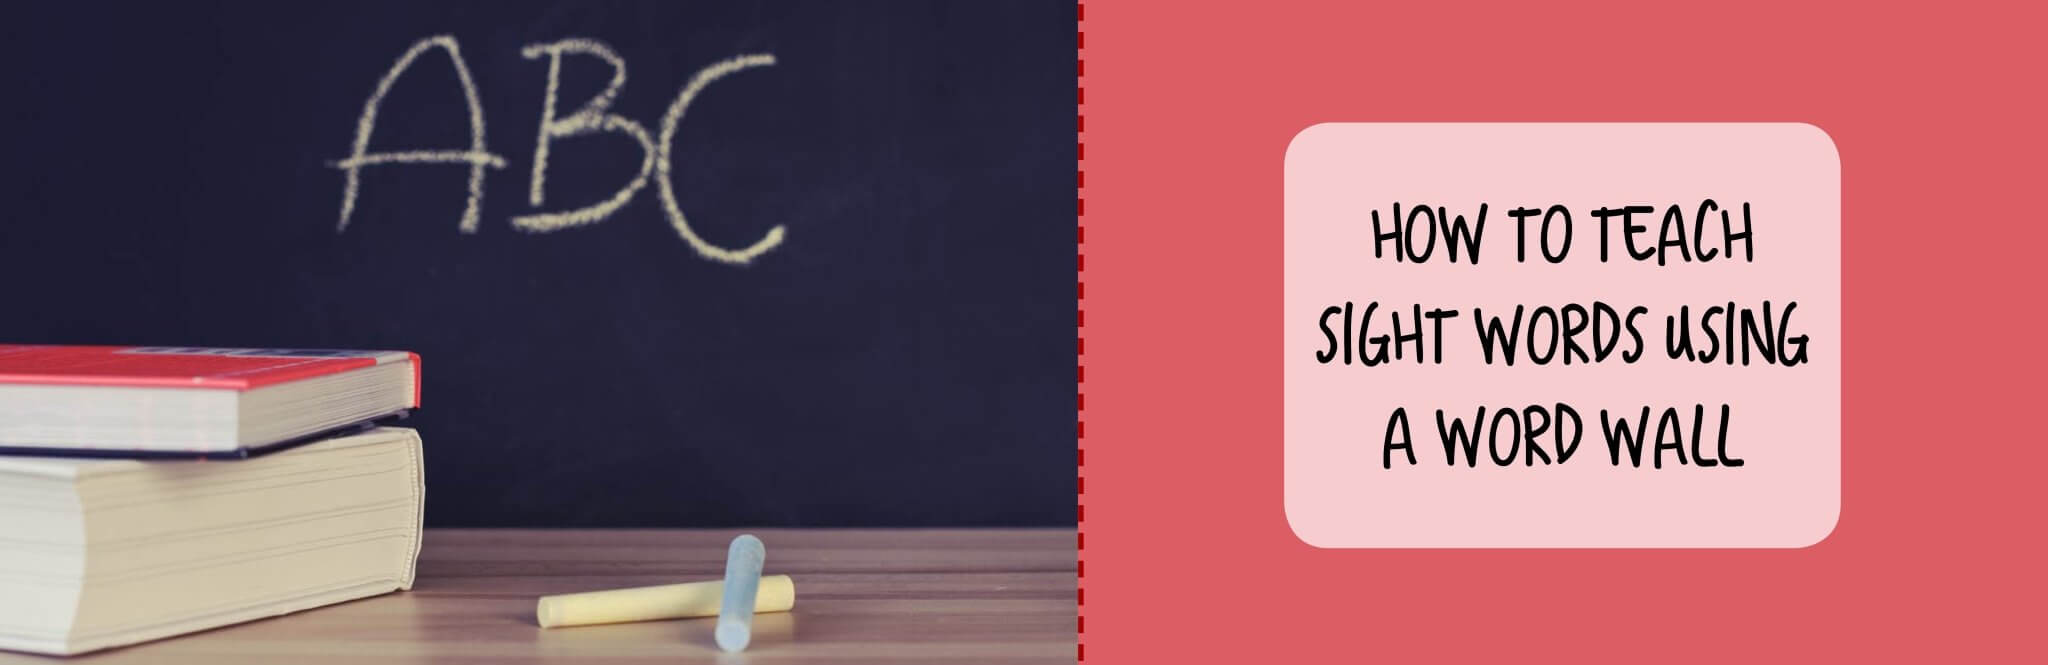 How to Teach Sight Words Using a Word Wall